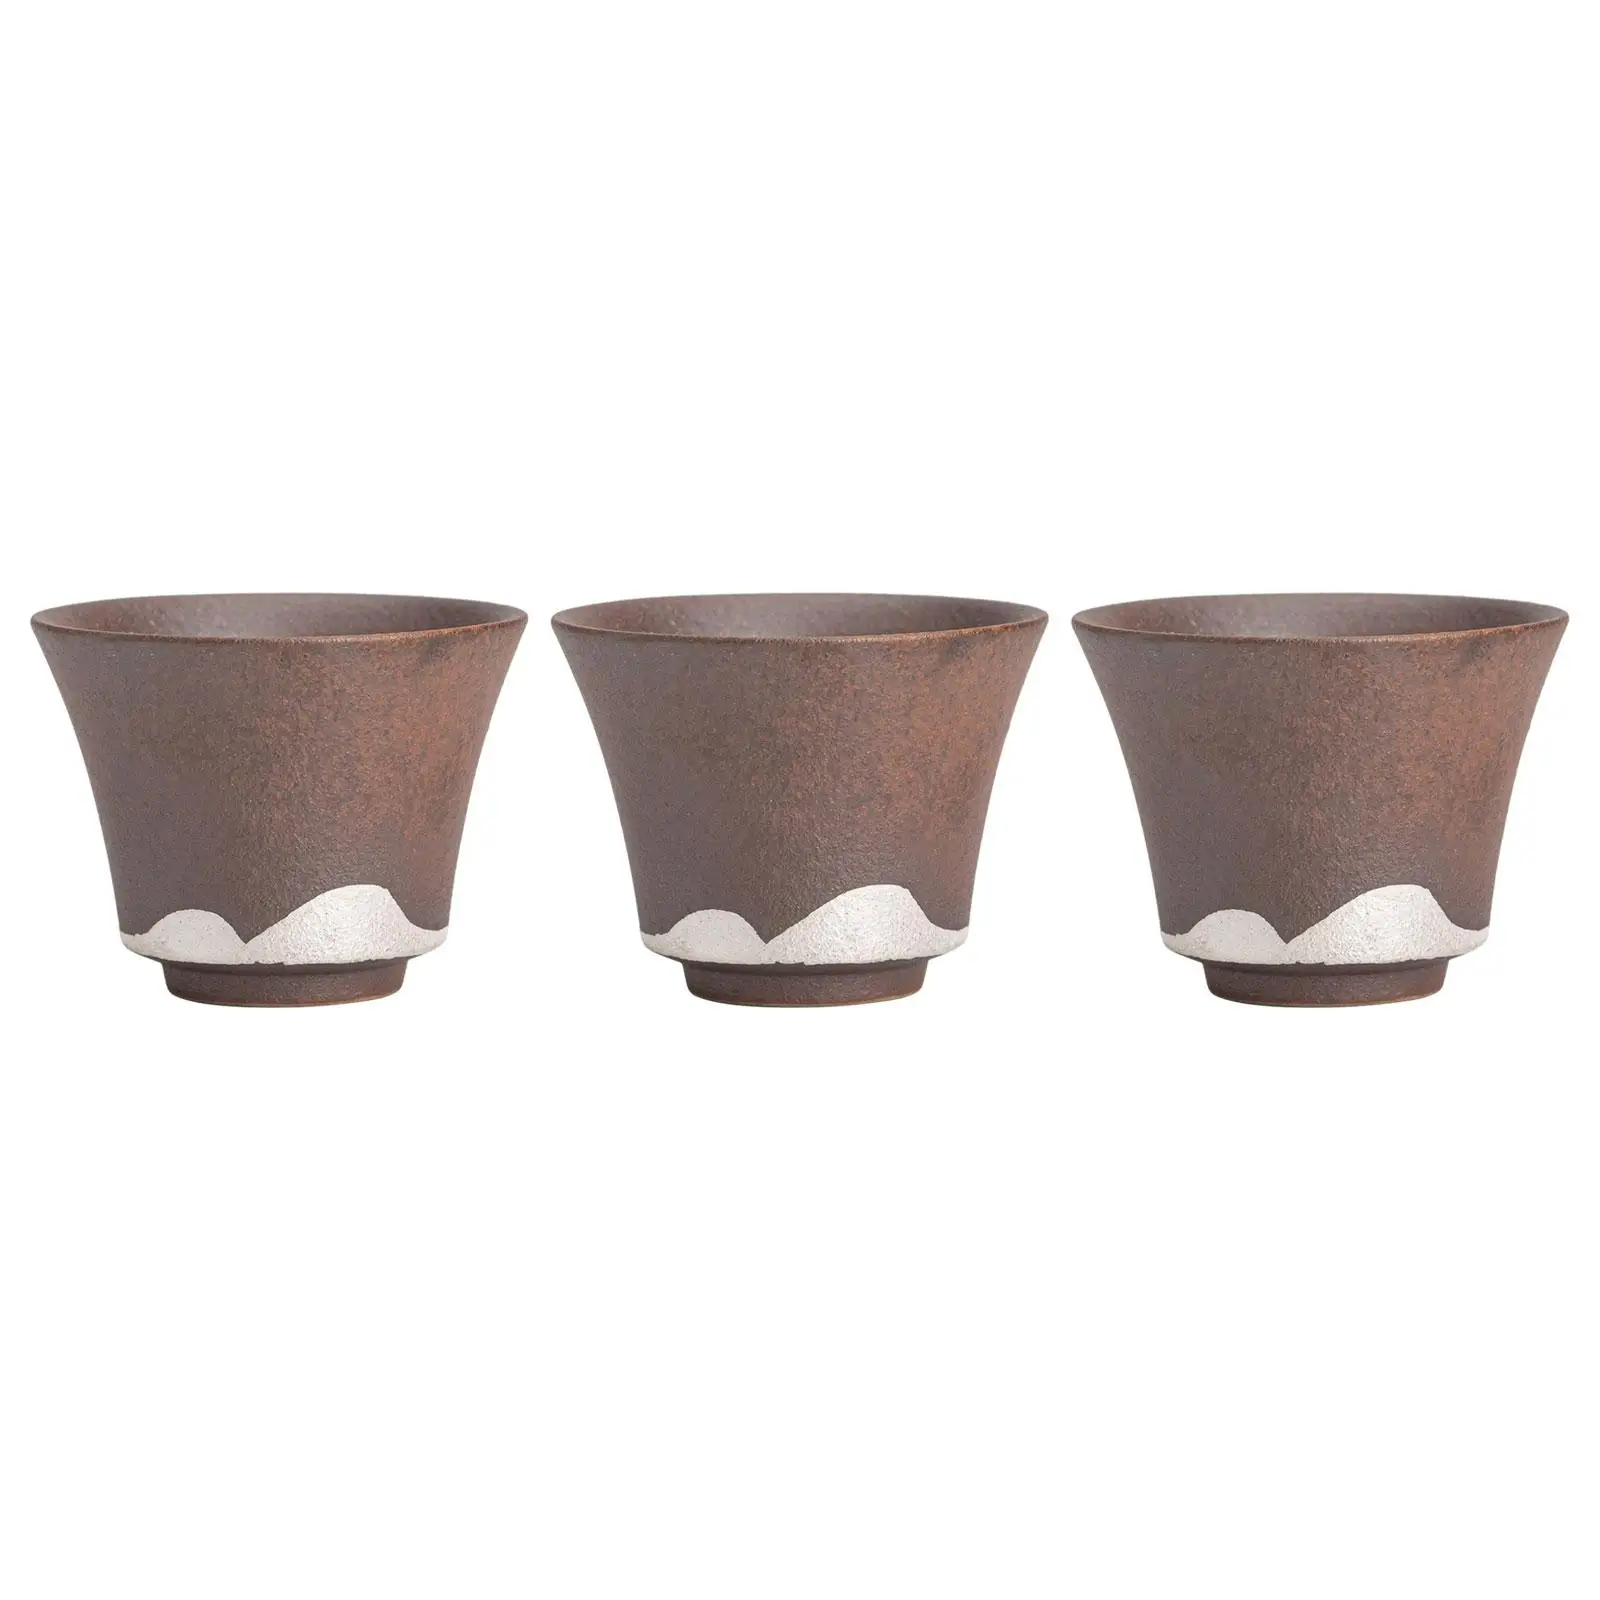 3Pcs Ceramic Tea Cup Set Cup Traditional Tea Kettles Coffee Cup without Handles for Picnic Kitchen Hiking Household